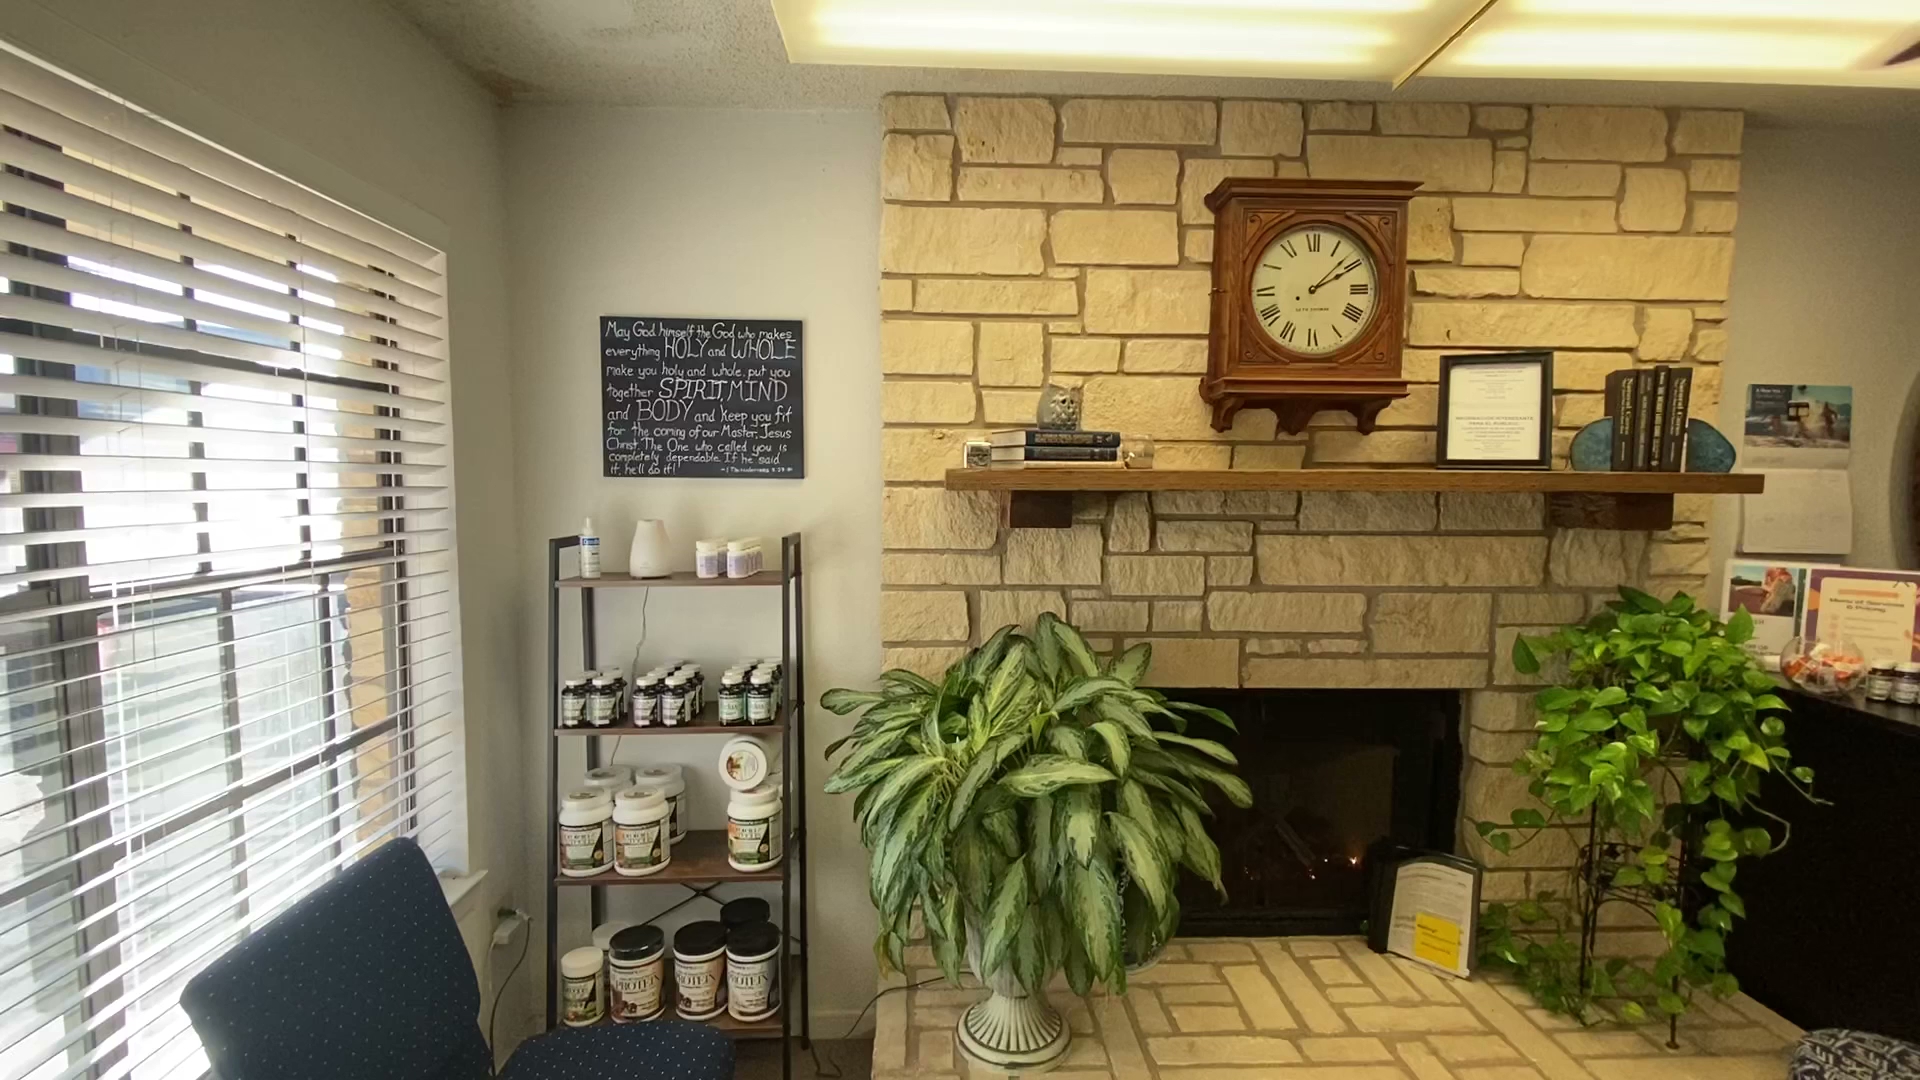 Complete Chiropractic Nutrition and Wellness Center